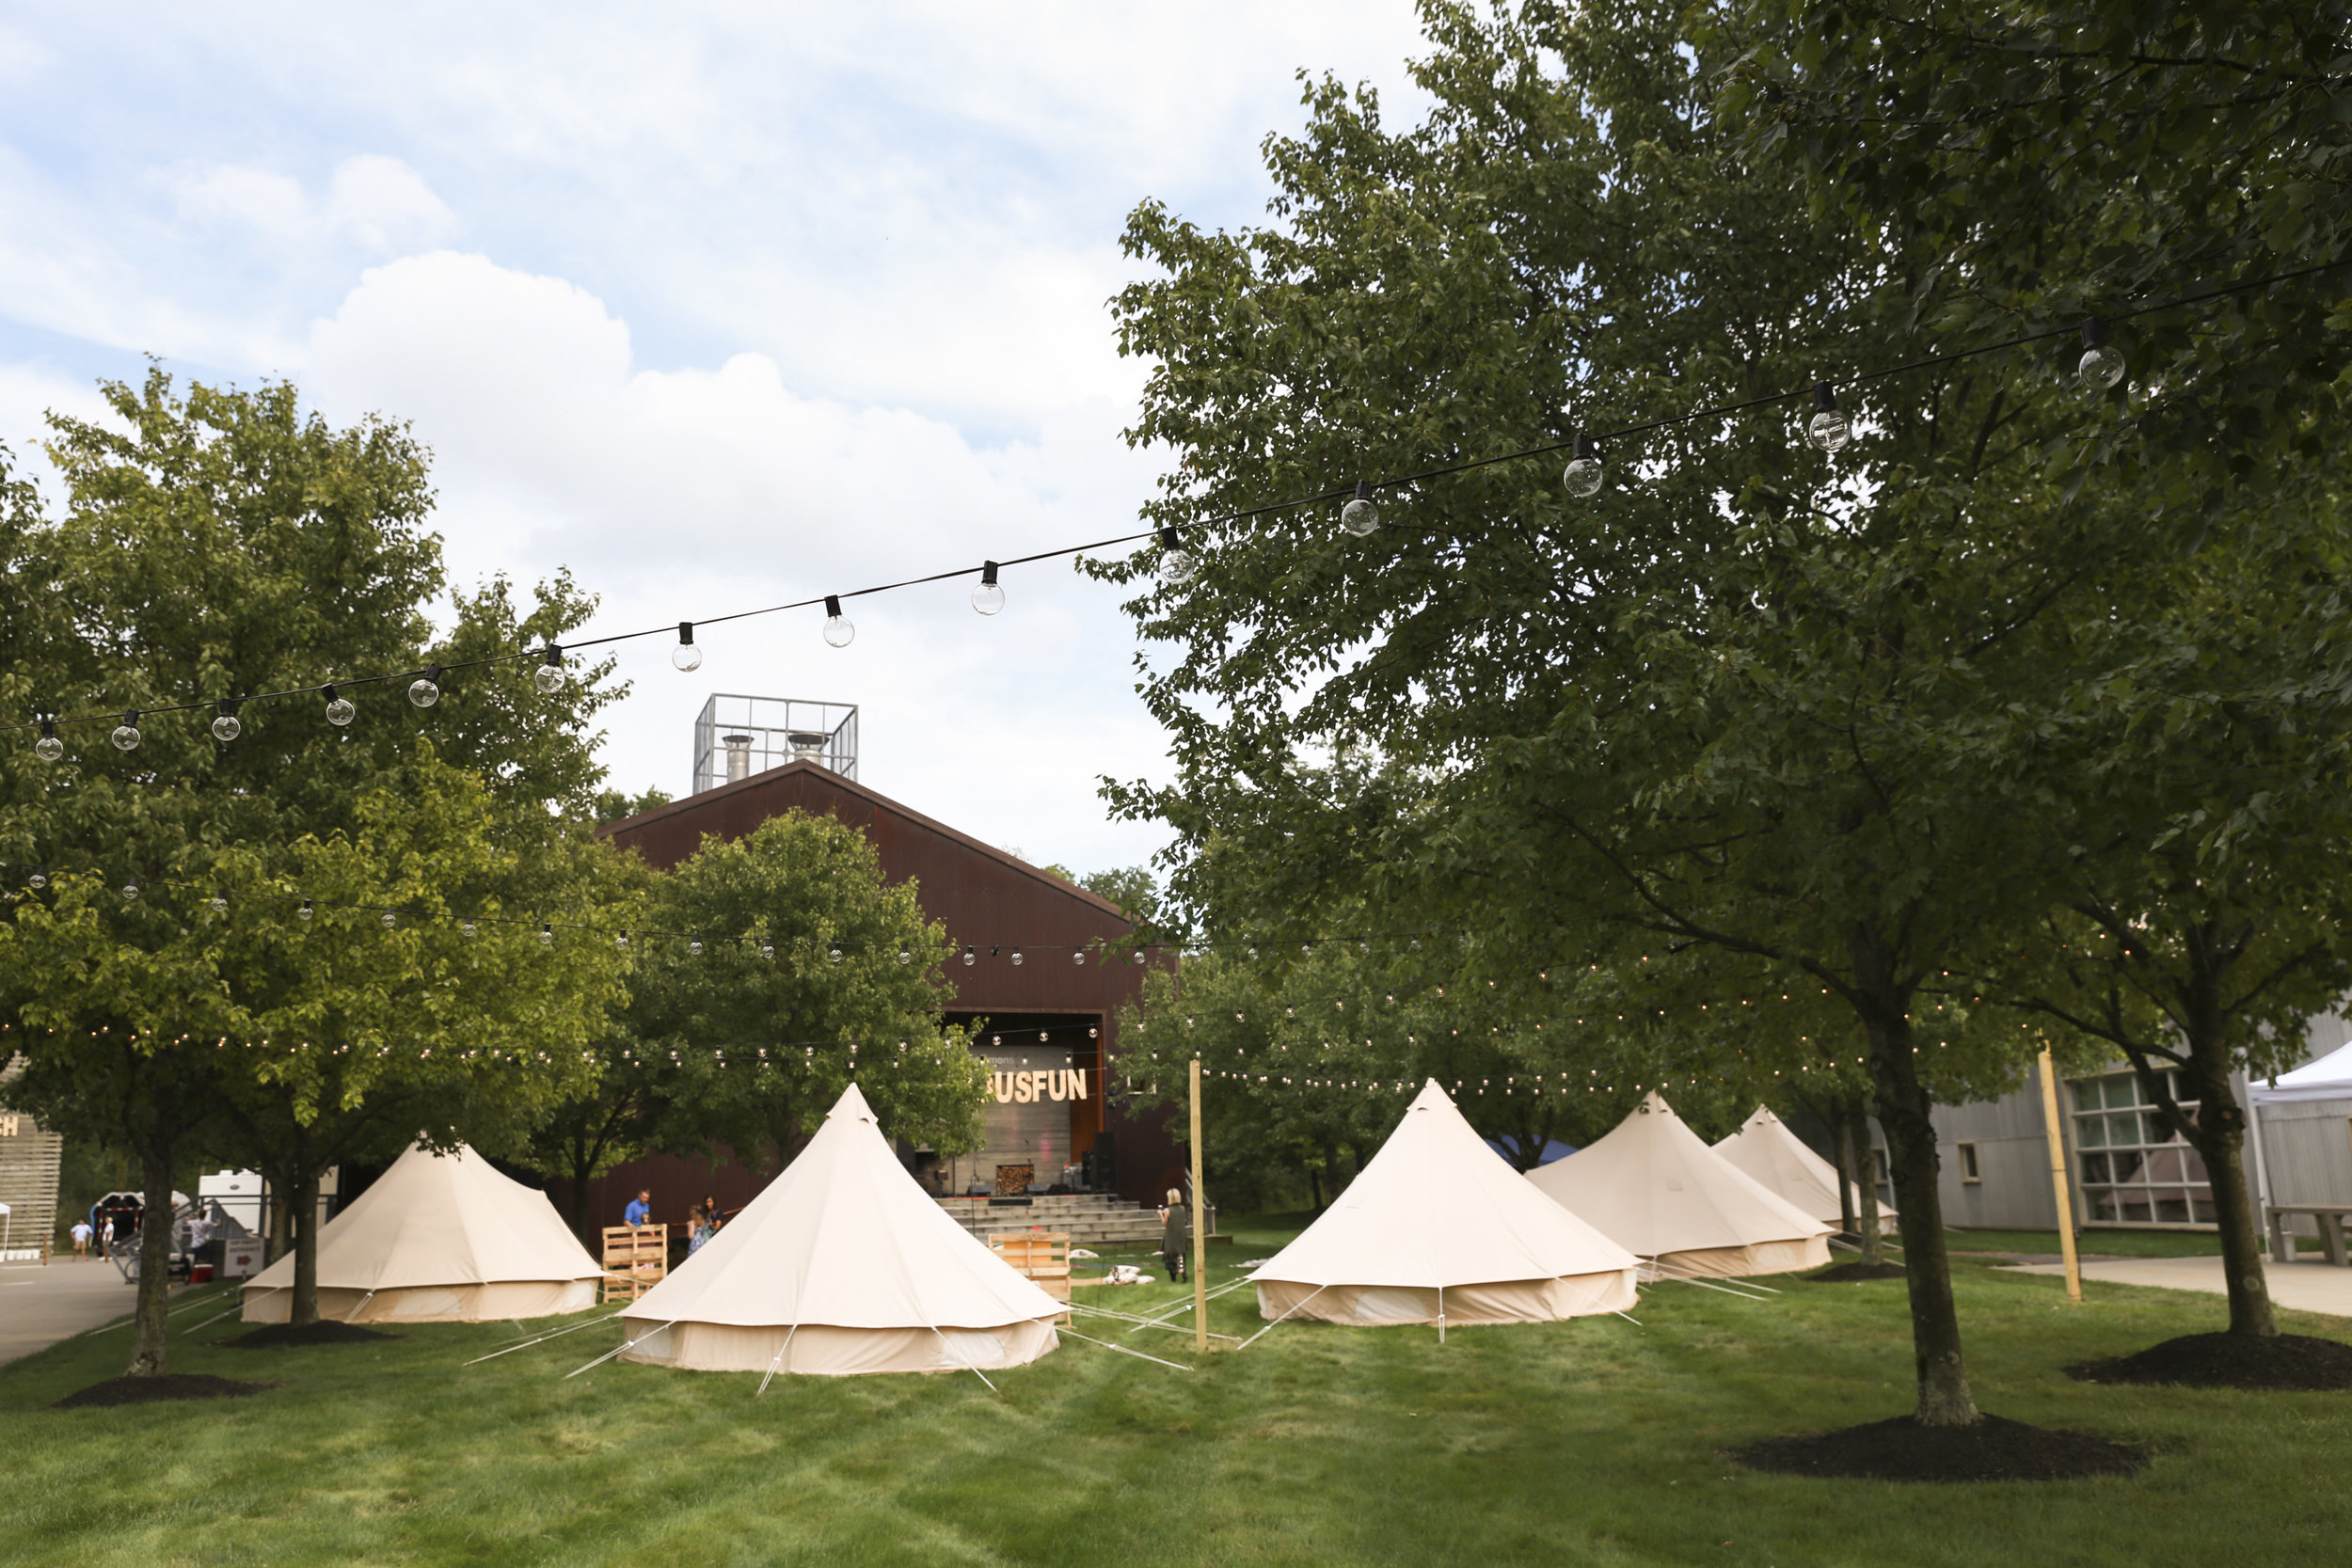 Luxury Glamping Tents